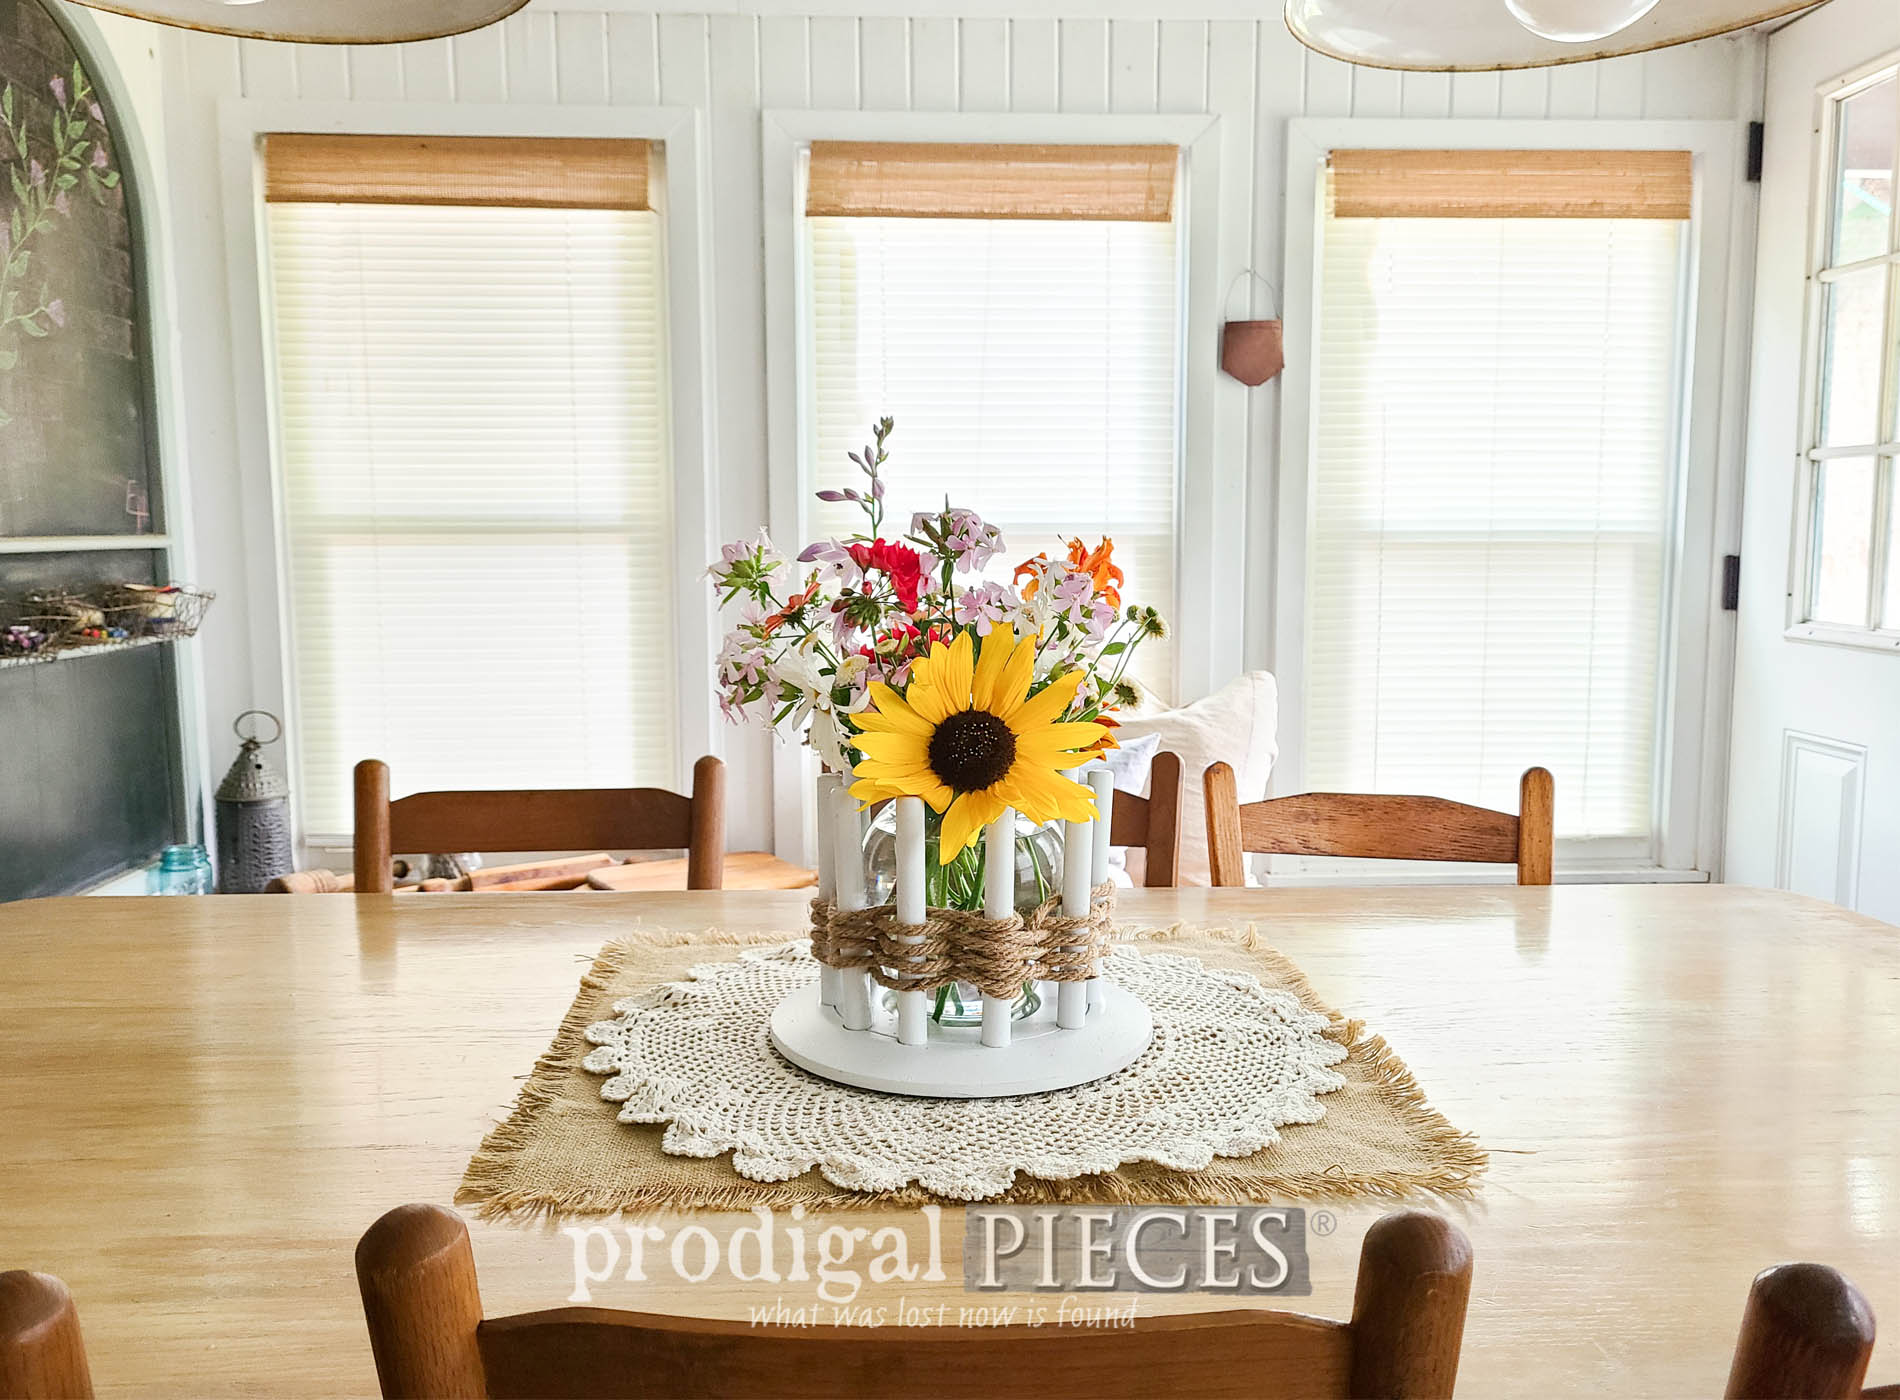 Featured DIY Rope Vase Centerpiece by Larissa of Prodigal Pieces from Upcycled Wooden Thingy | prodigalpieces.com #prodigalpieces #diy #upcycled